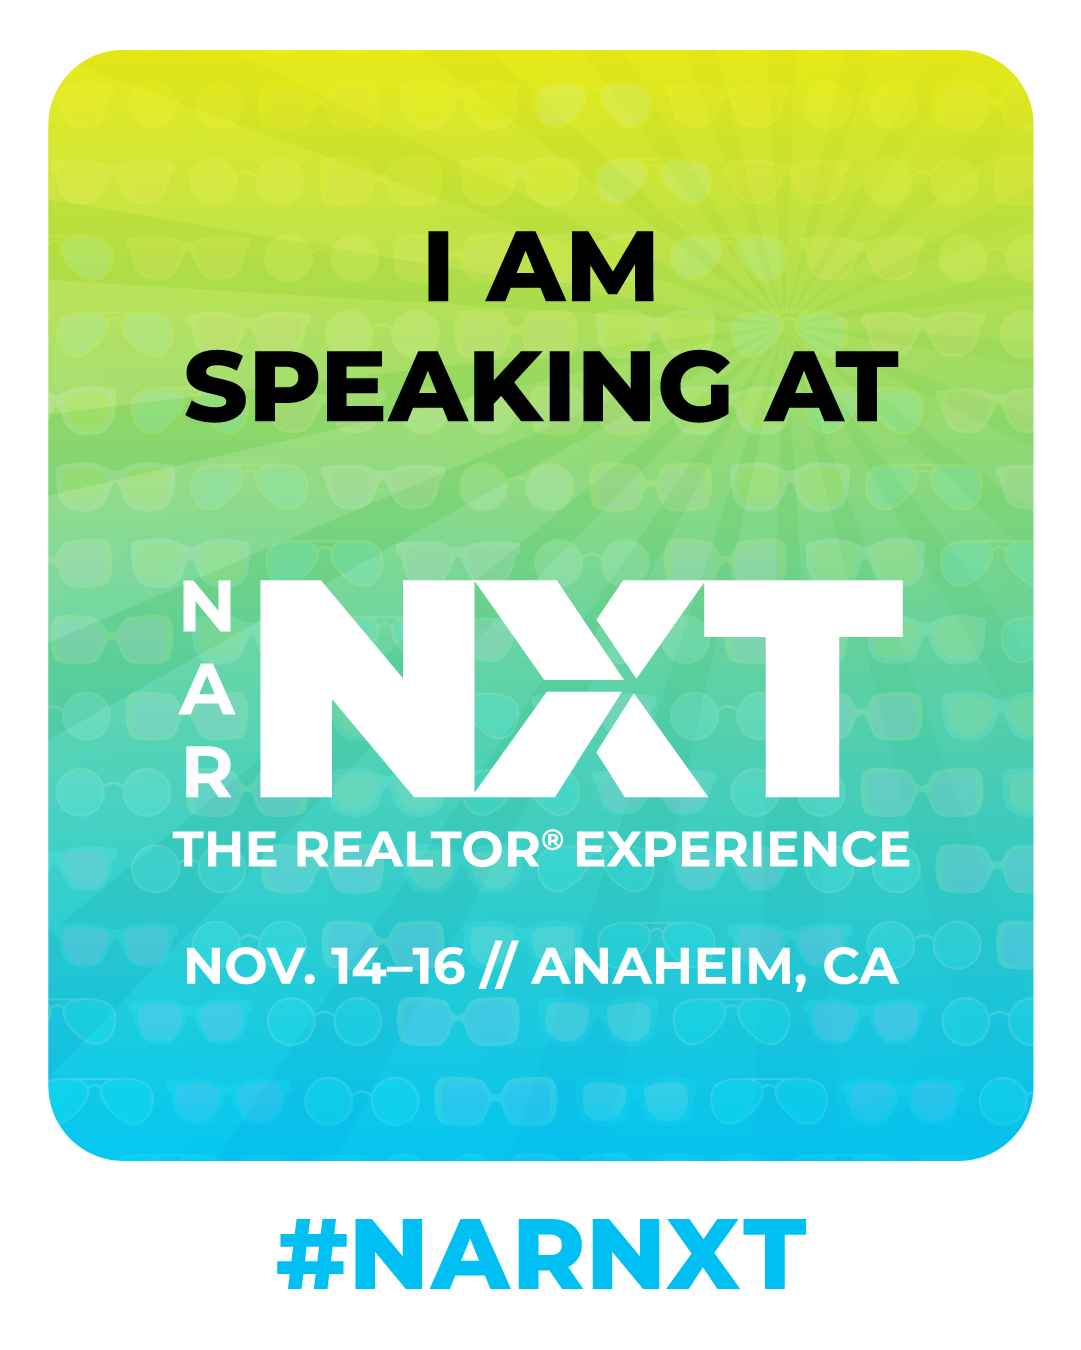 I am speaking at NAR NXT, The REALTOR® Experience social share graphic, teal and yellow colors